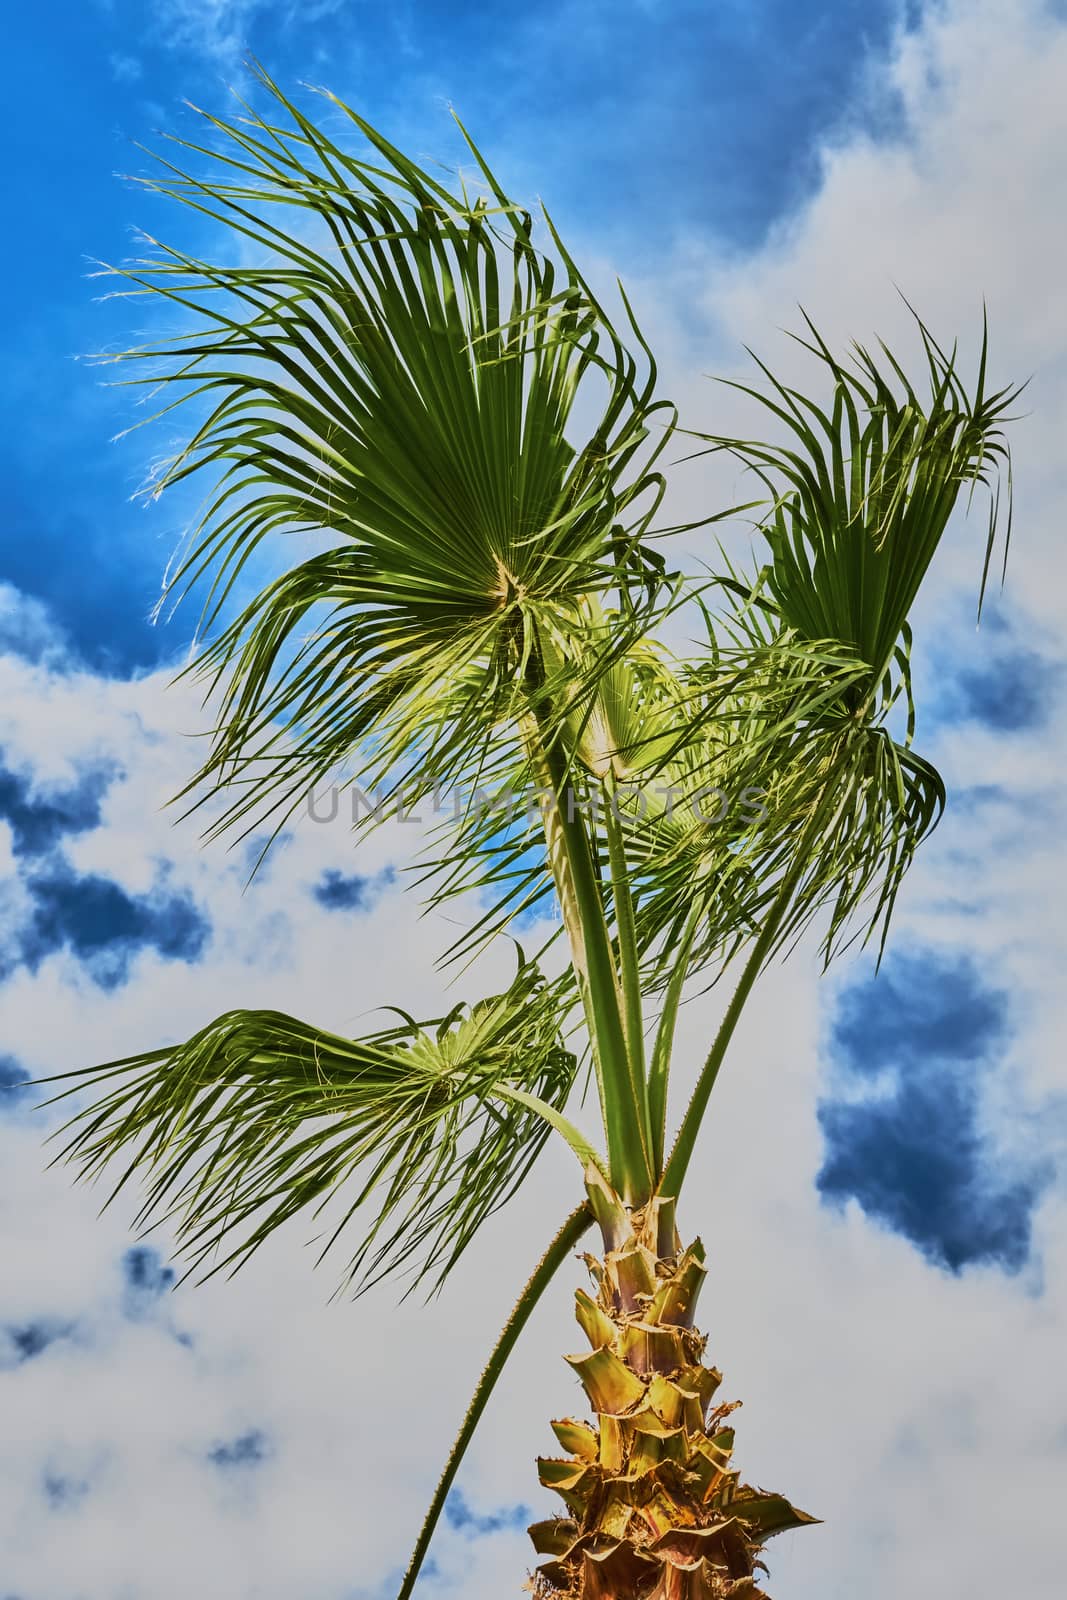 Top of a palm tree  by Vitolef